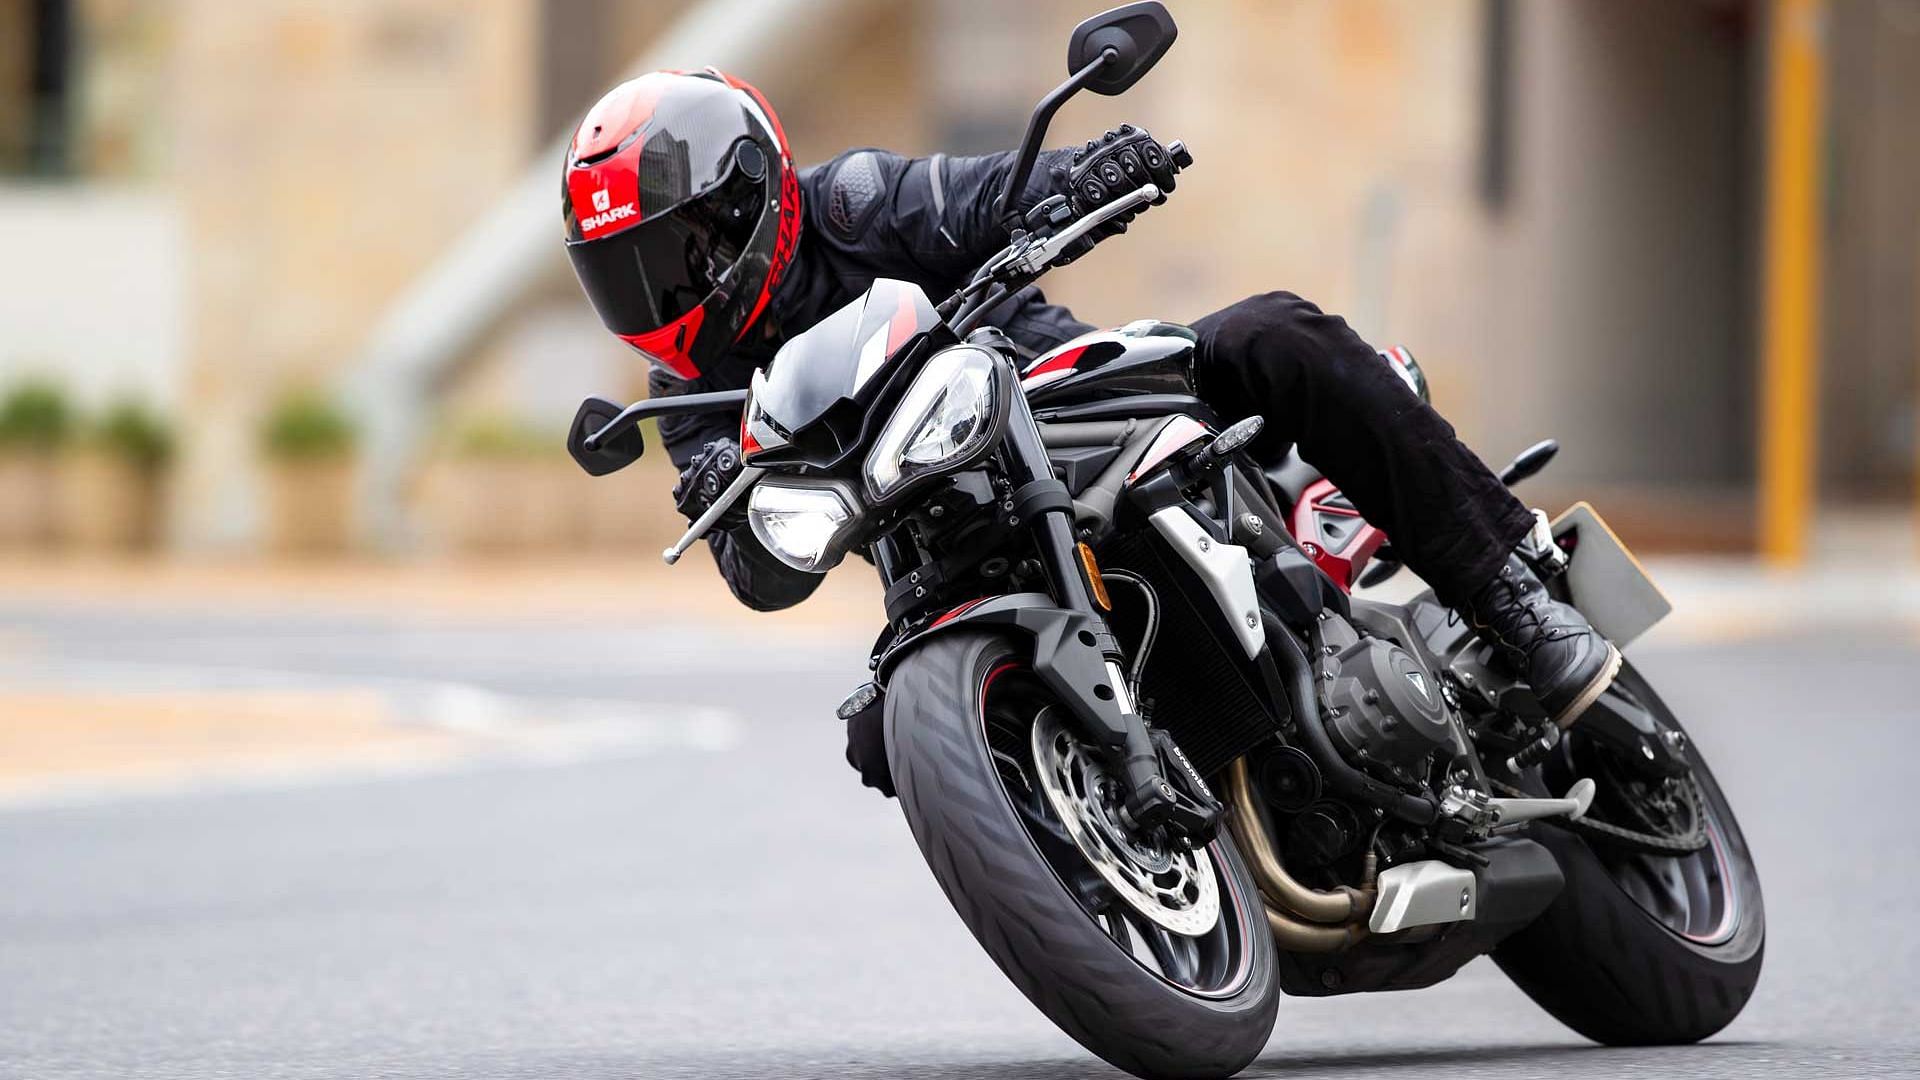 The new Street Triple R is powered by a 765cc engine.